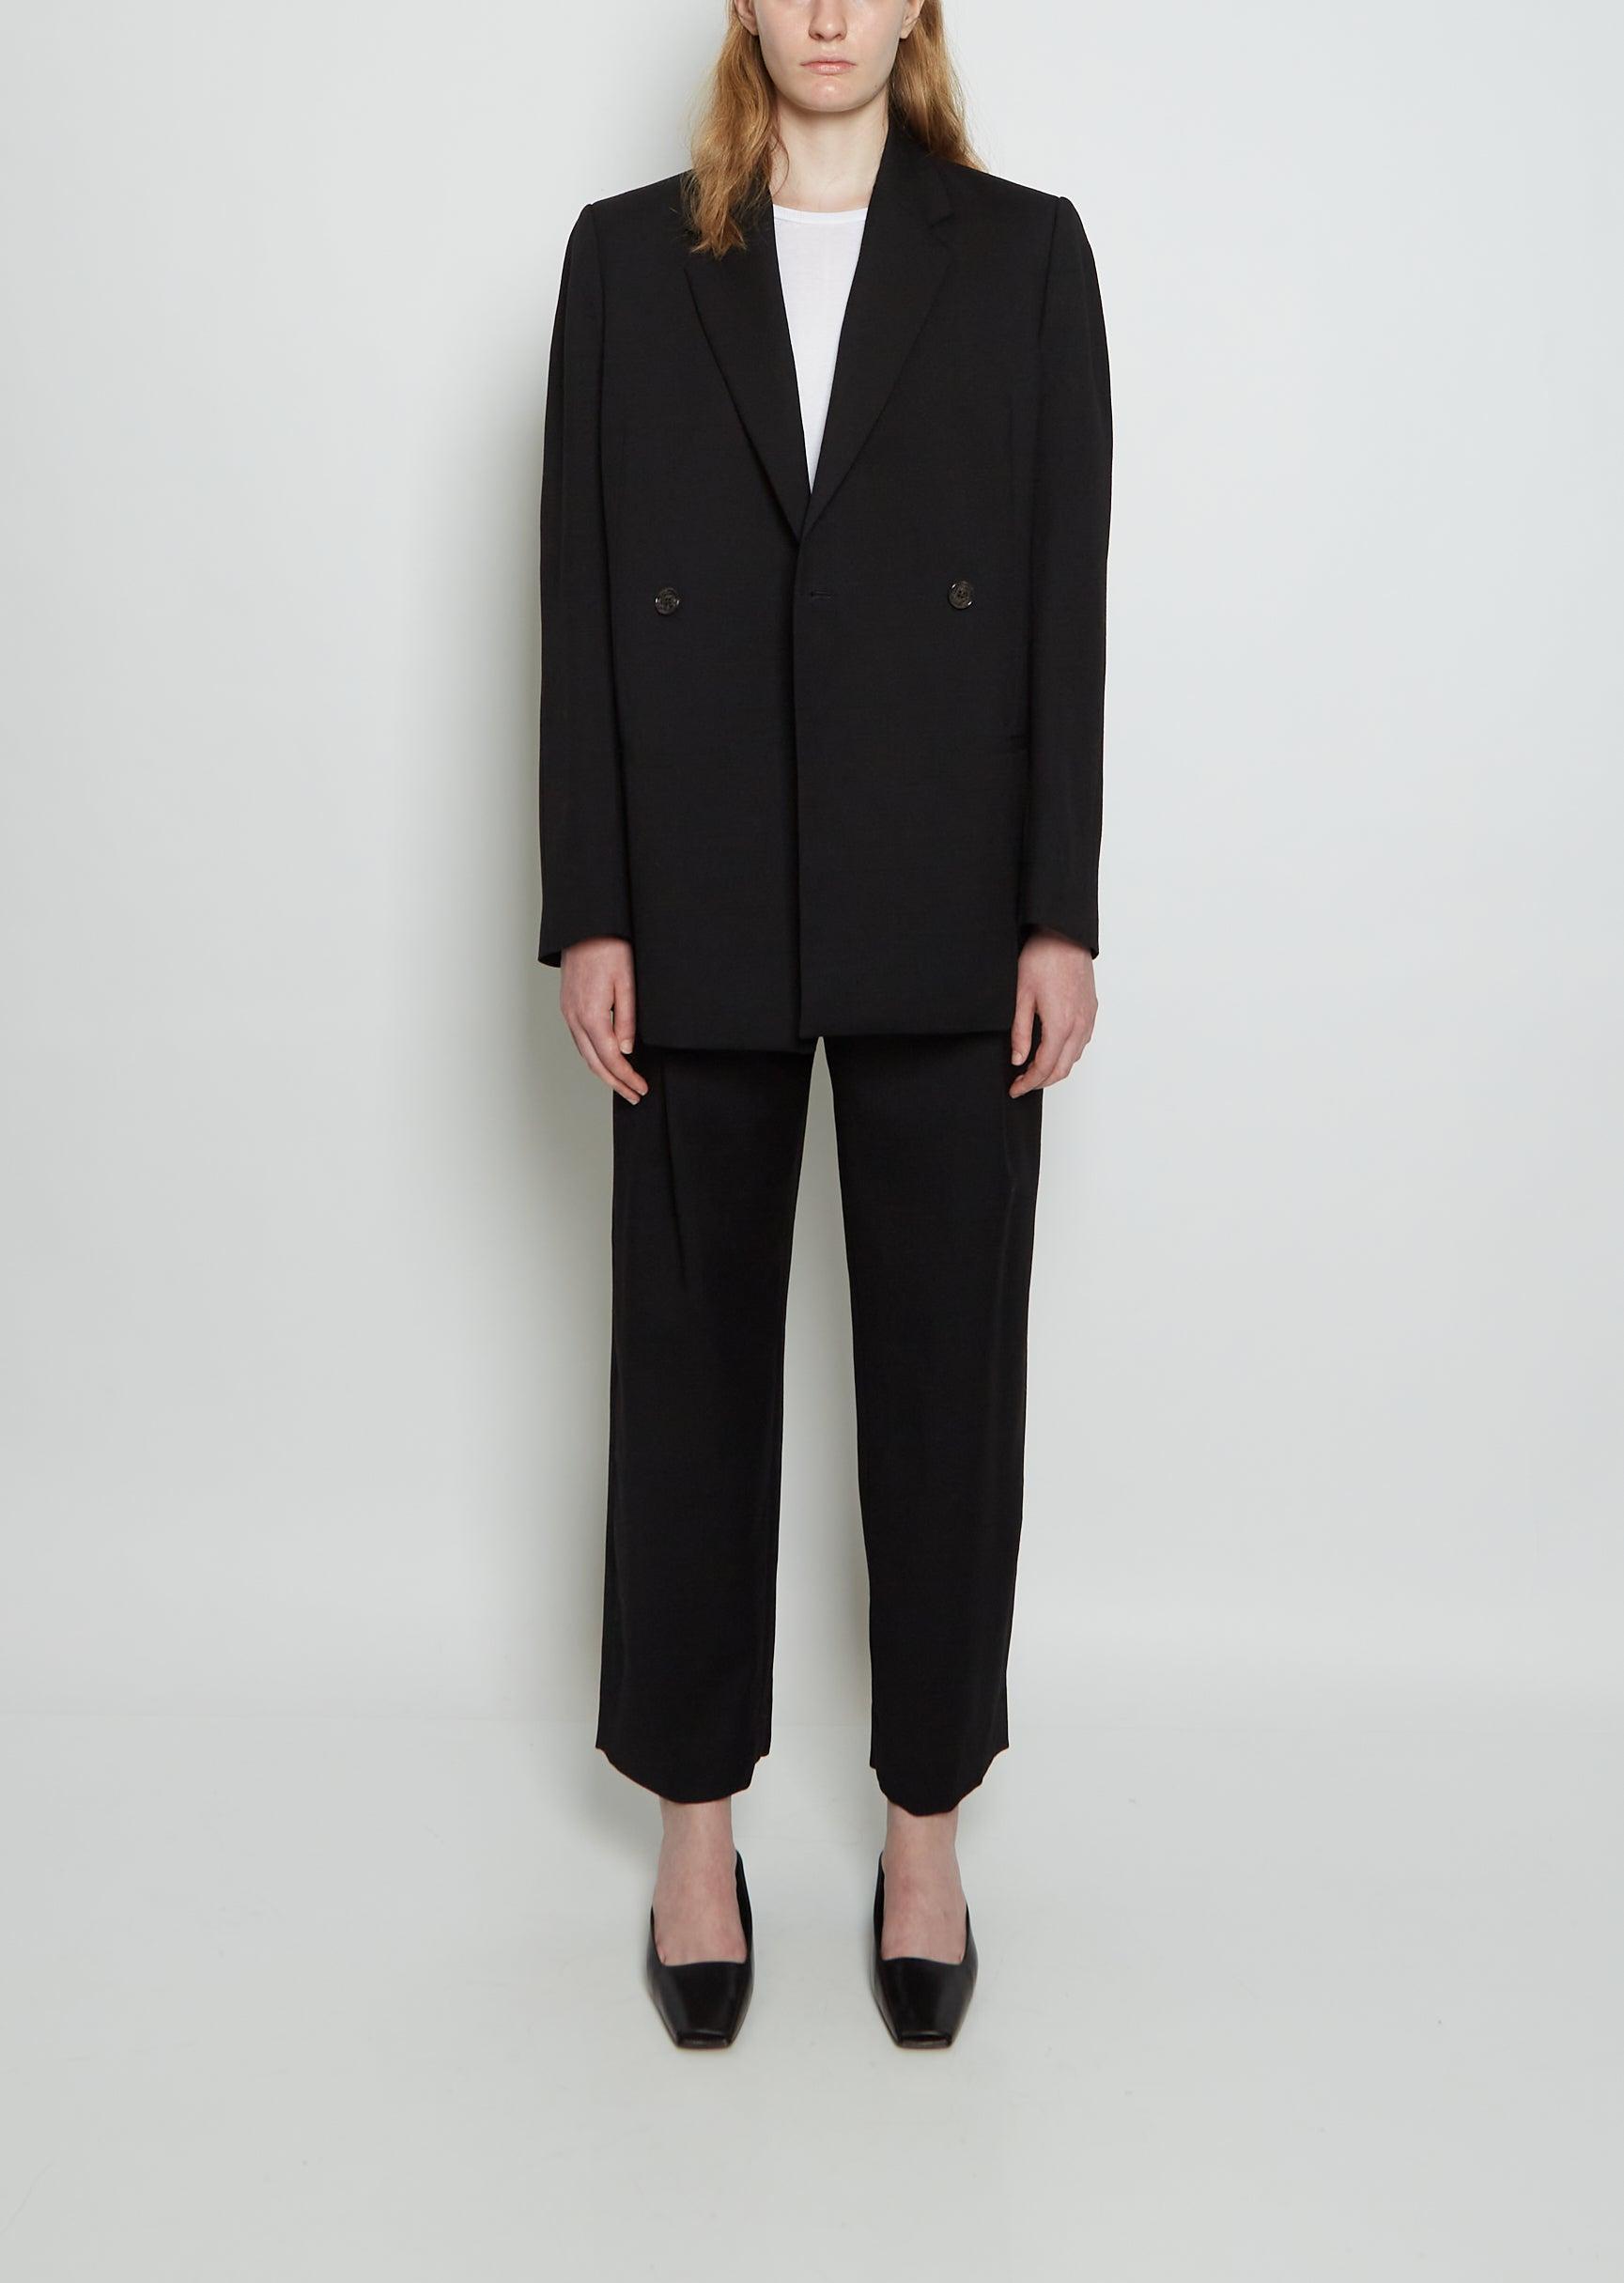 Totême Double-breasted Vent Wool Blazer in Black | Lyst Canada